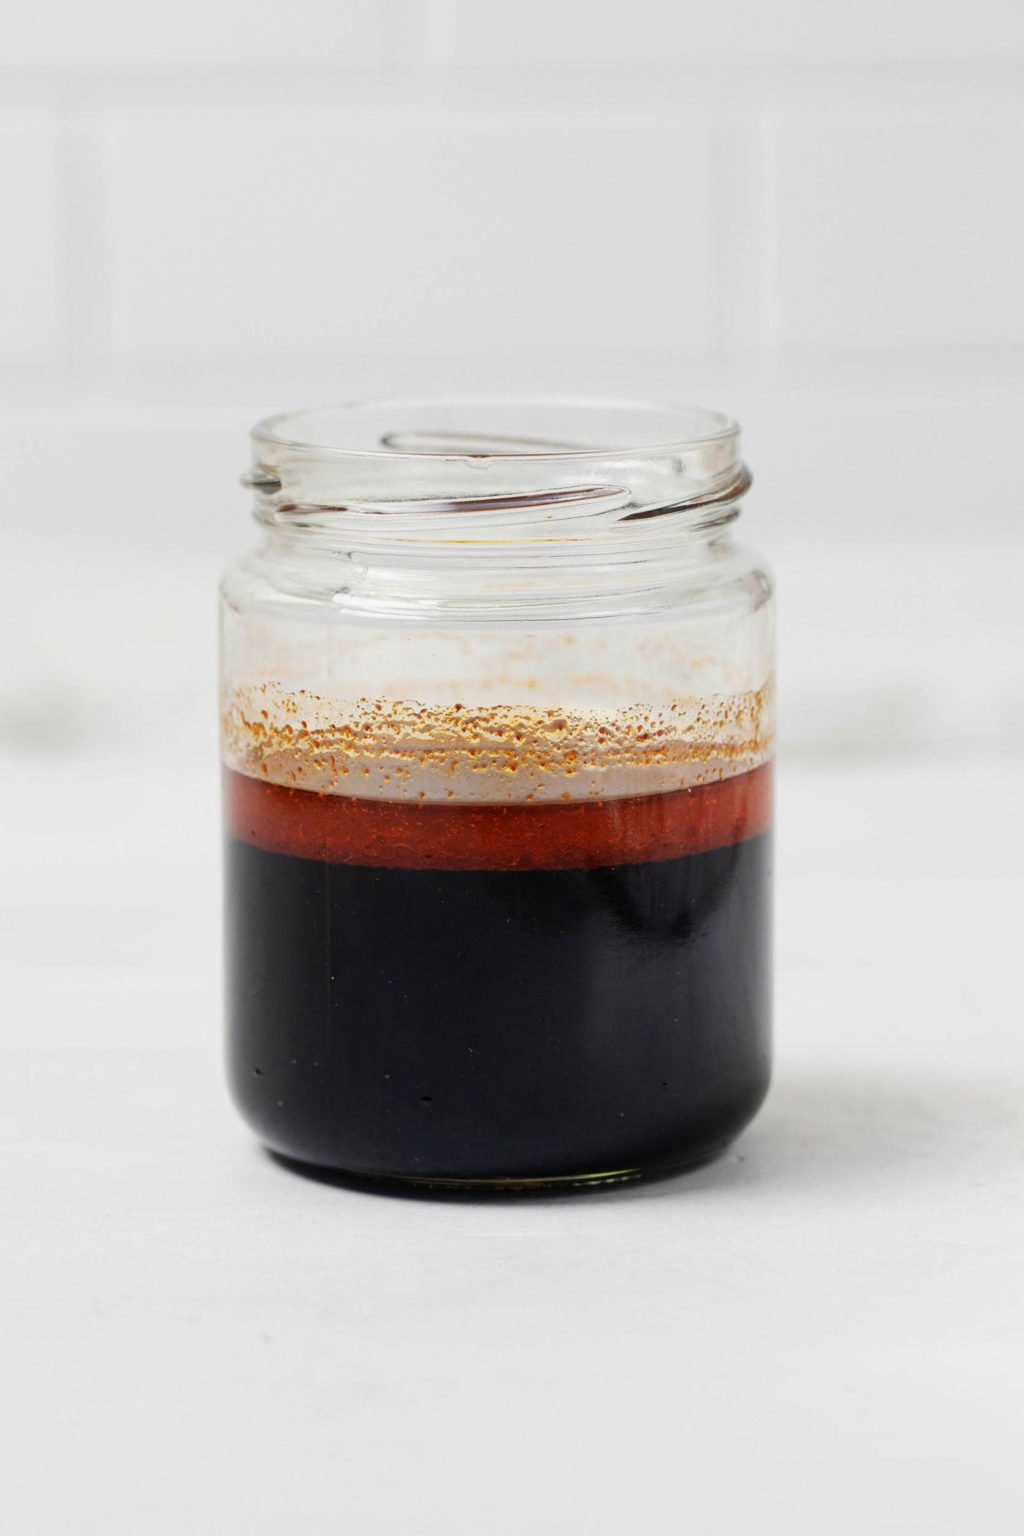 A glass mason jar has been filled with a dark brown marinade.